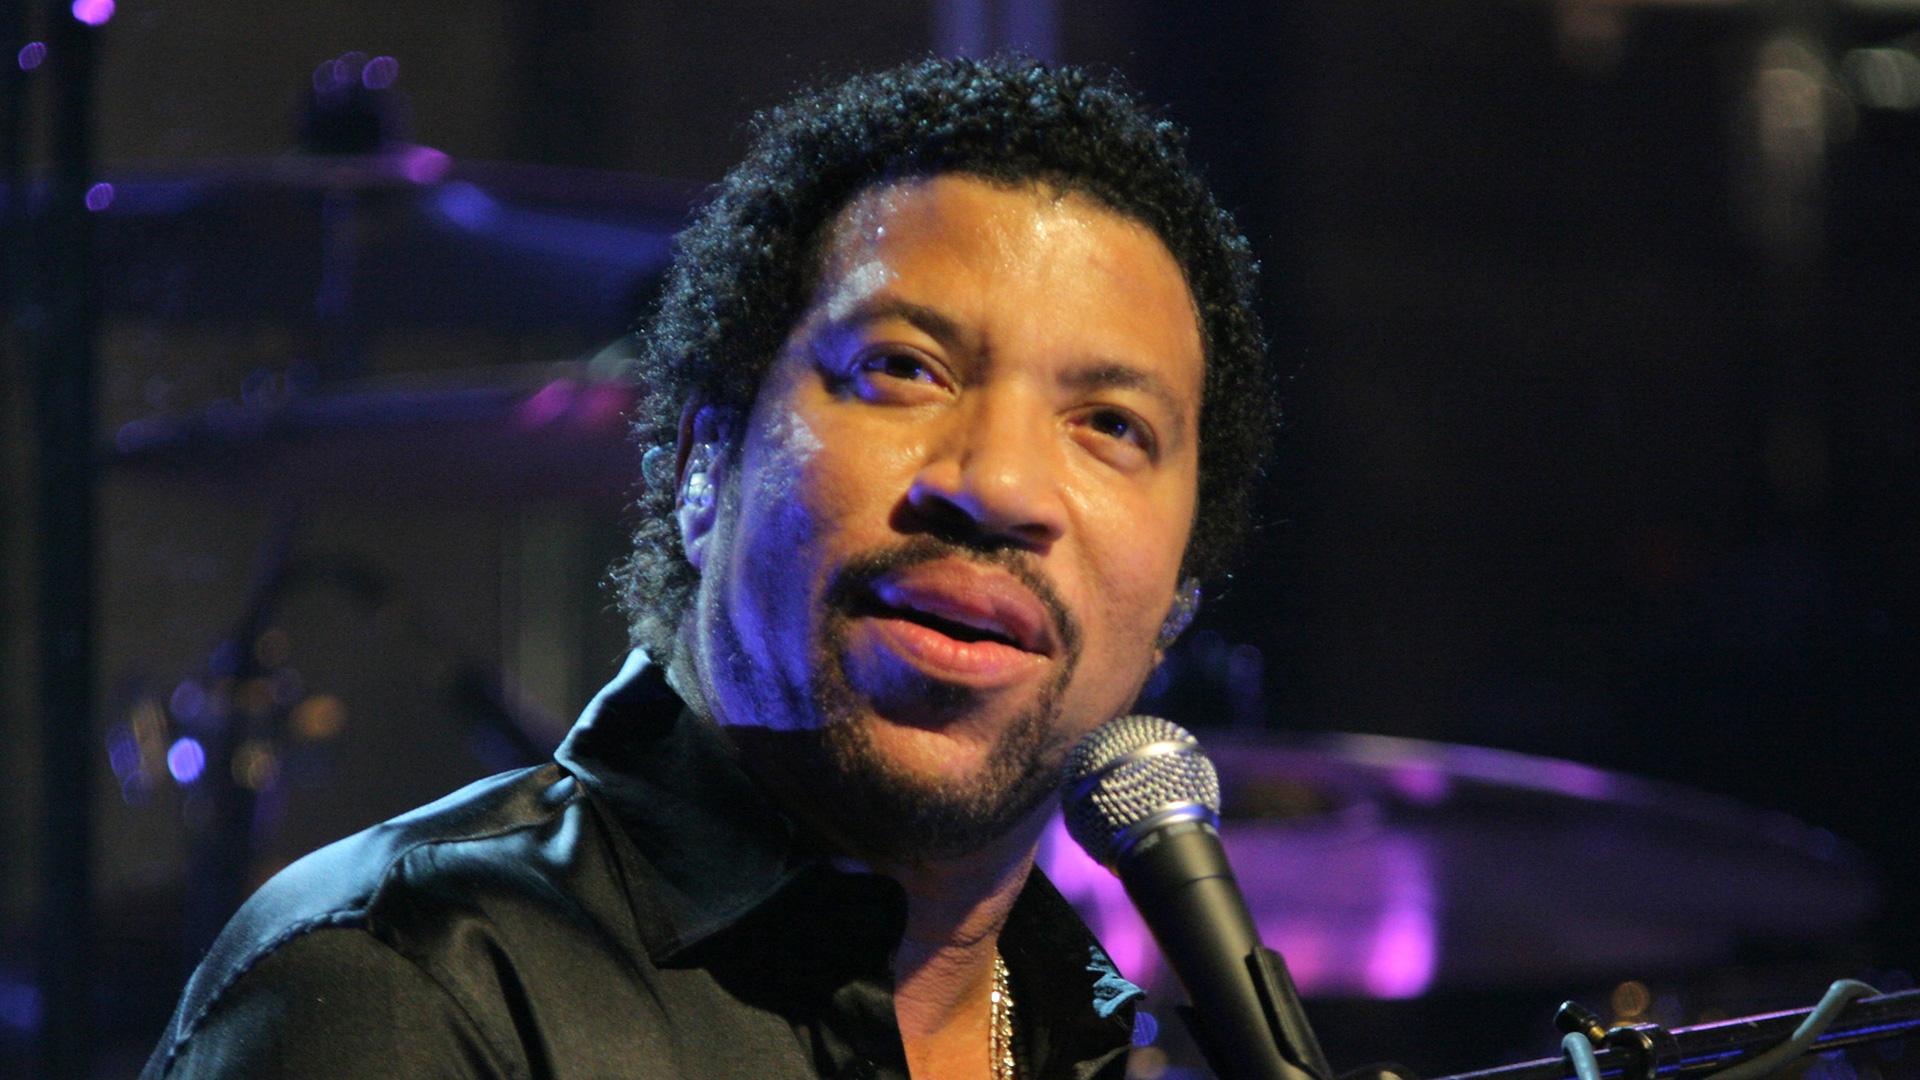 Lionel Richie.awesome voice. Entertainers of all types that I